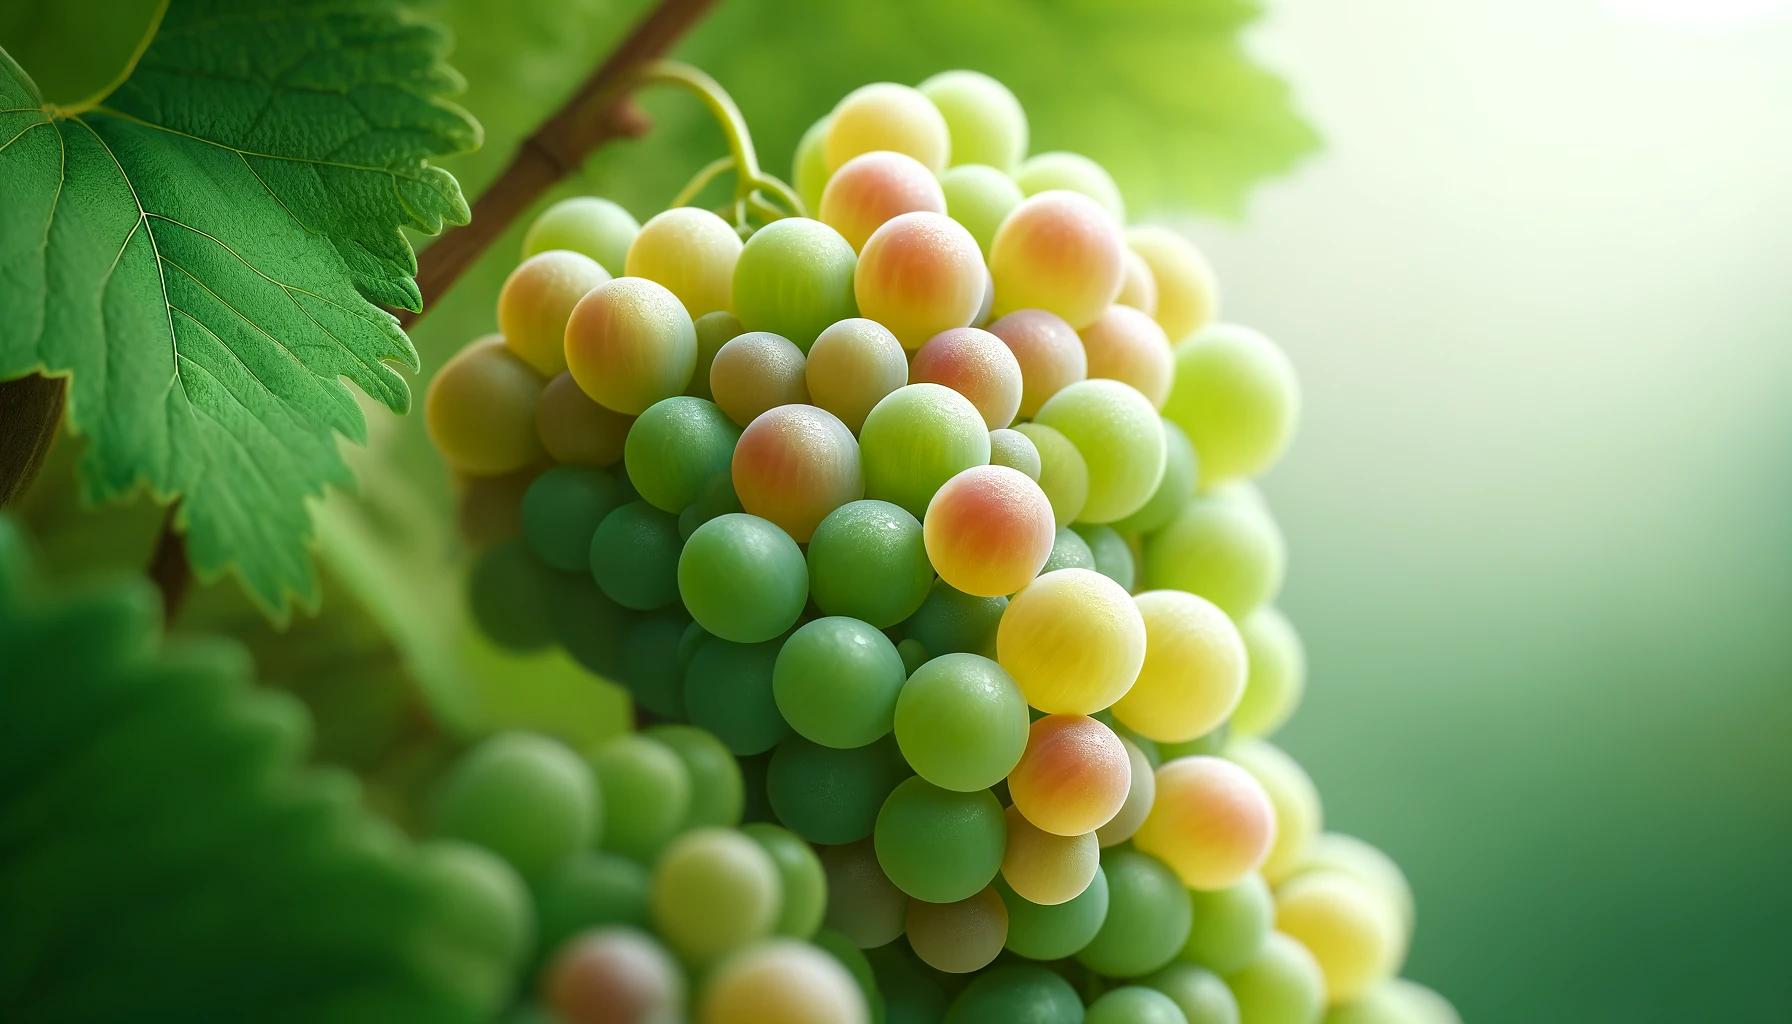 DALL·E 2024-05-23 11.23.40 - Close-up, photorealistic stock image of Pinot Grigio grapes, focusing on a cluster of ripe Pinot Grigio grapes with pale green to yellowish skins, att